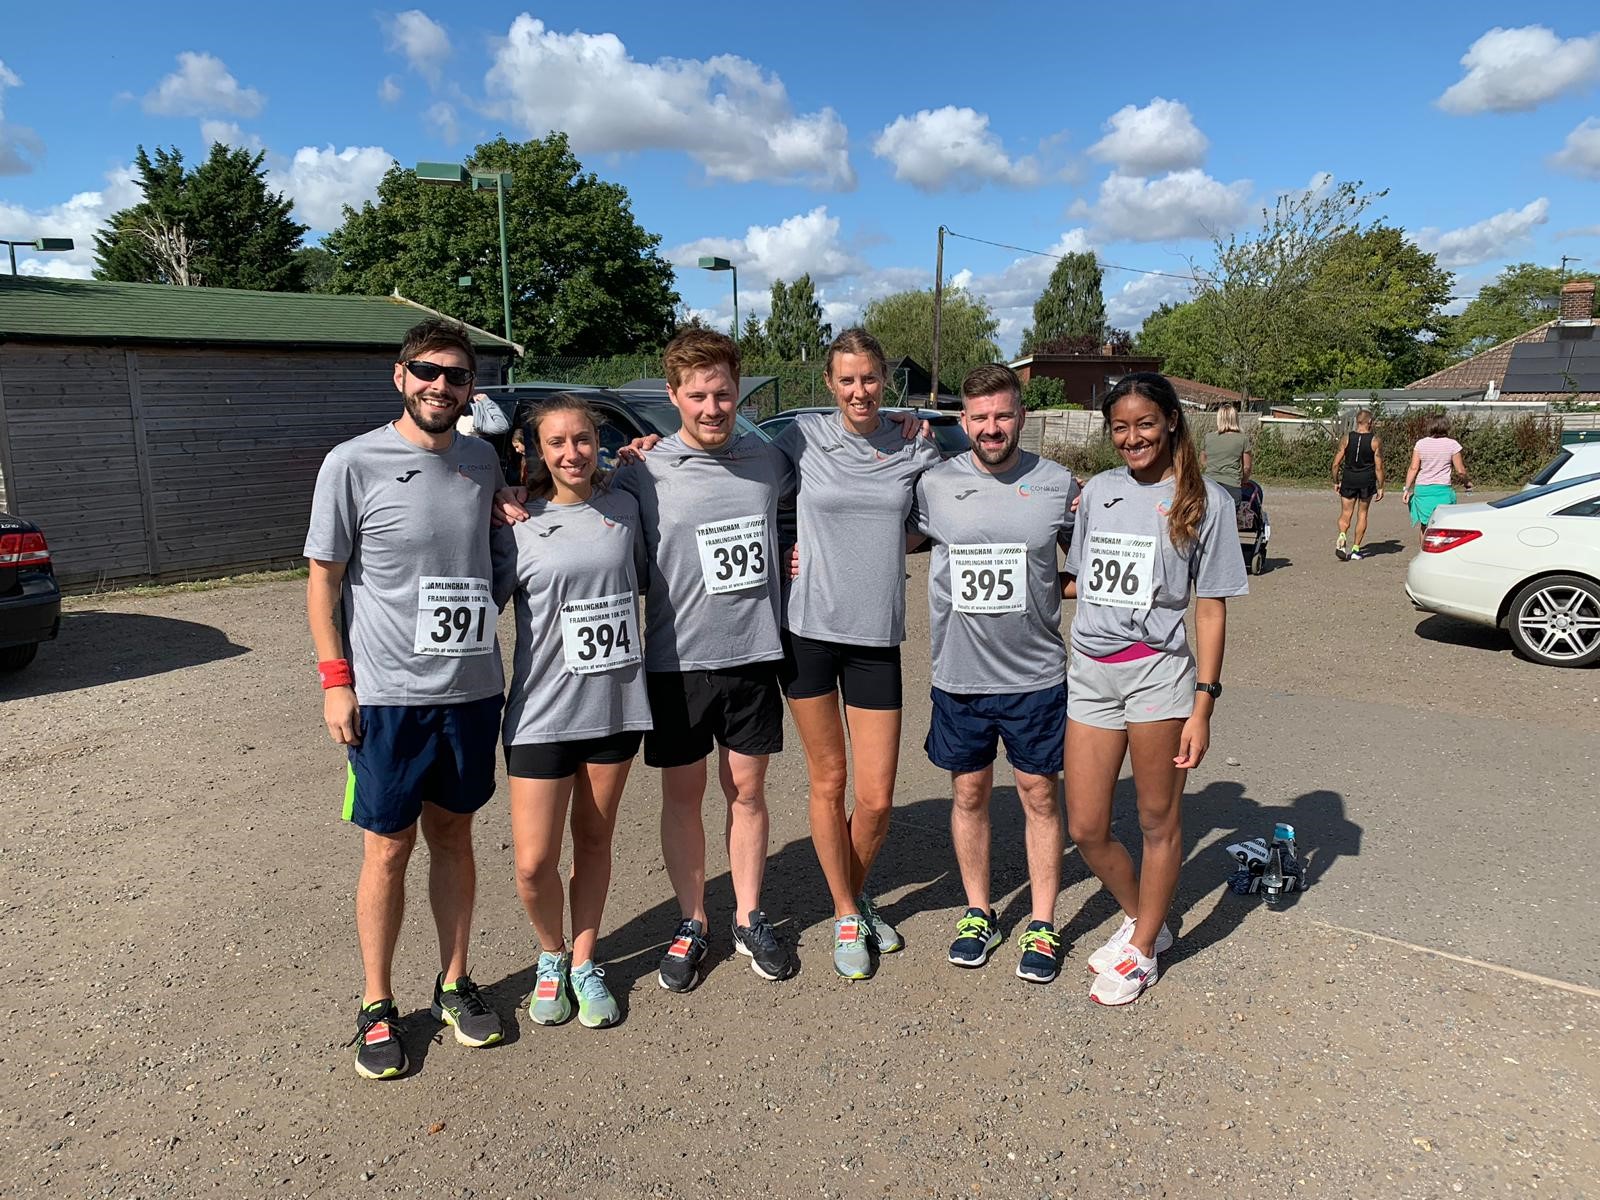 Group picture of Conrad runners before taking part in the 10k